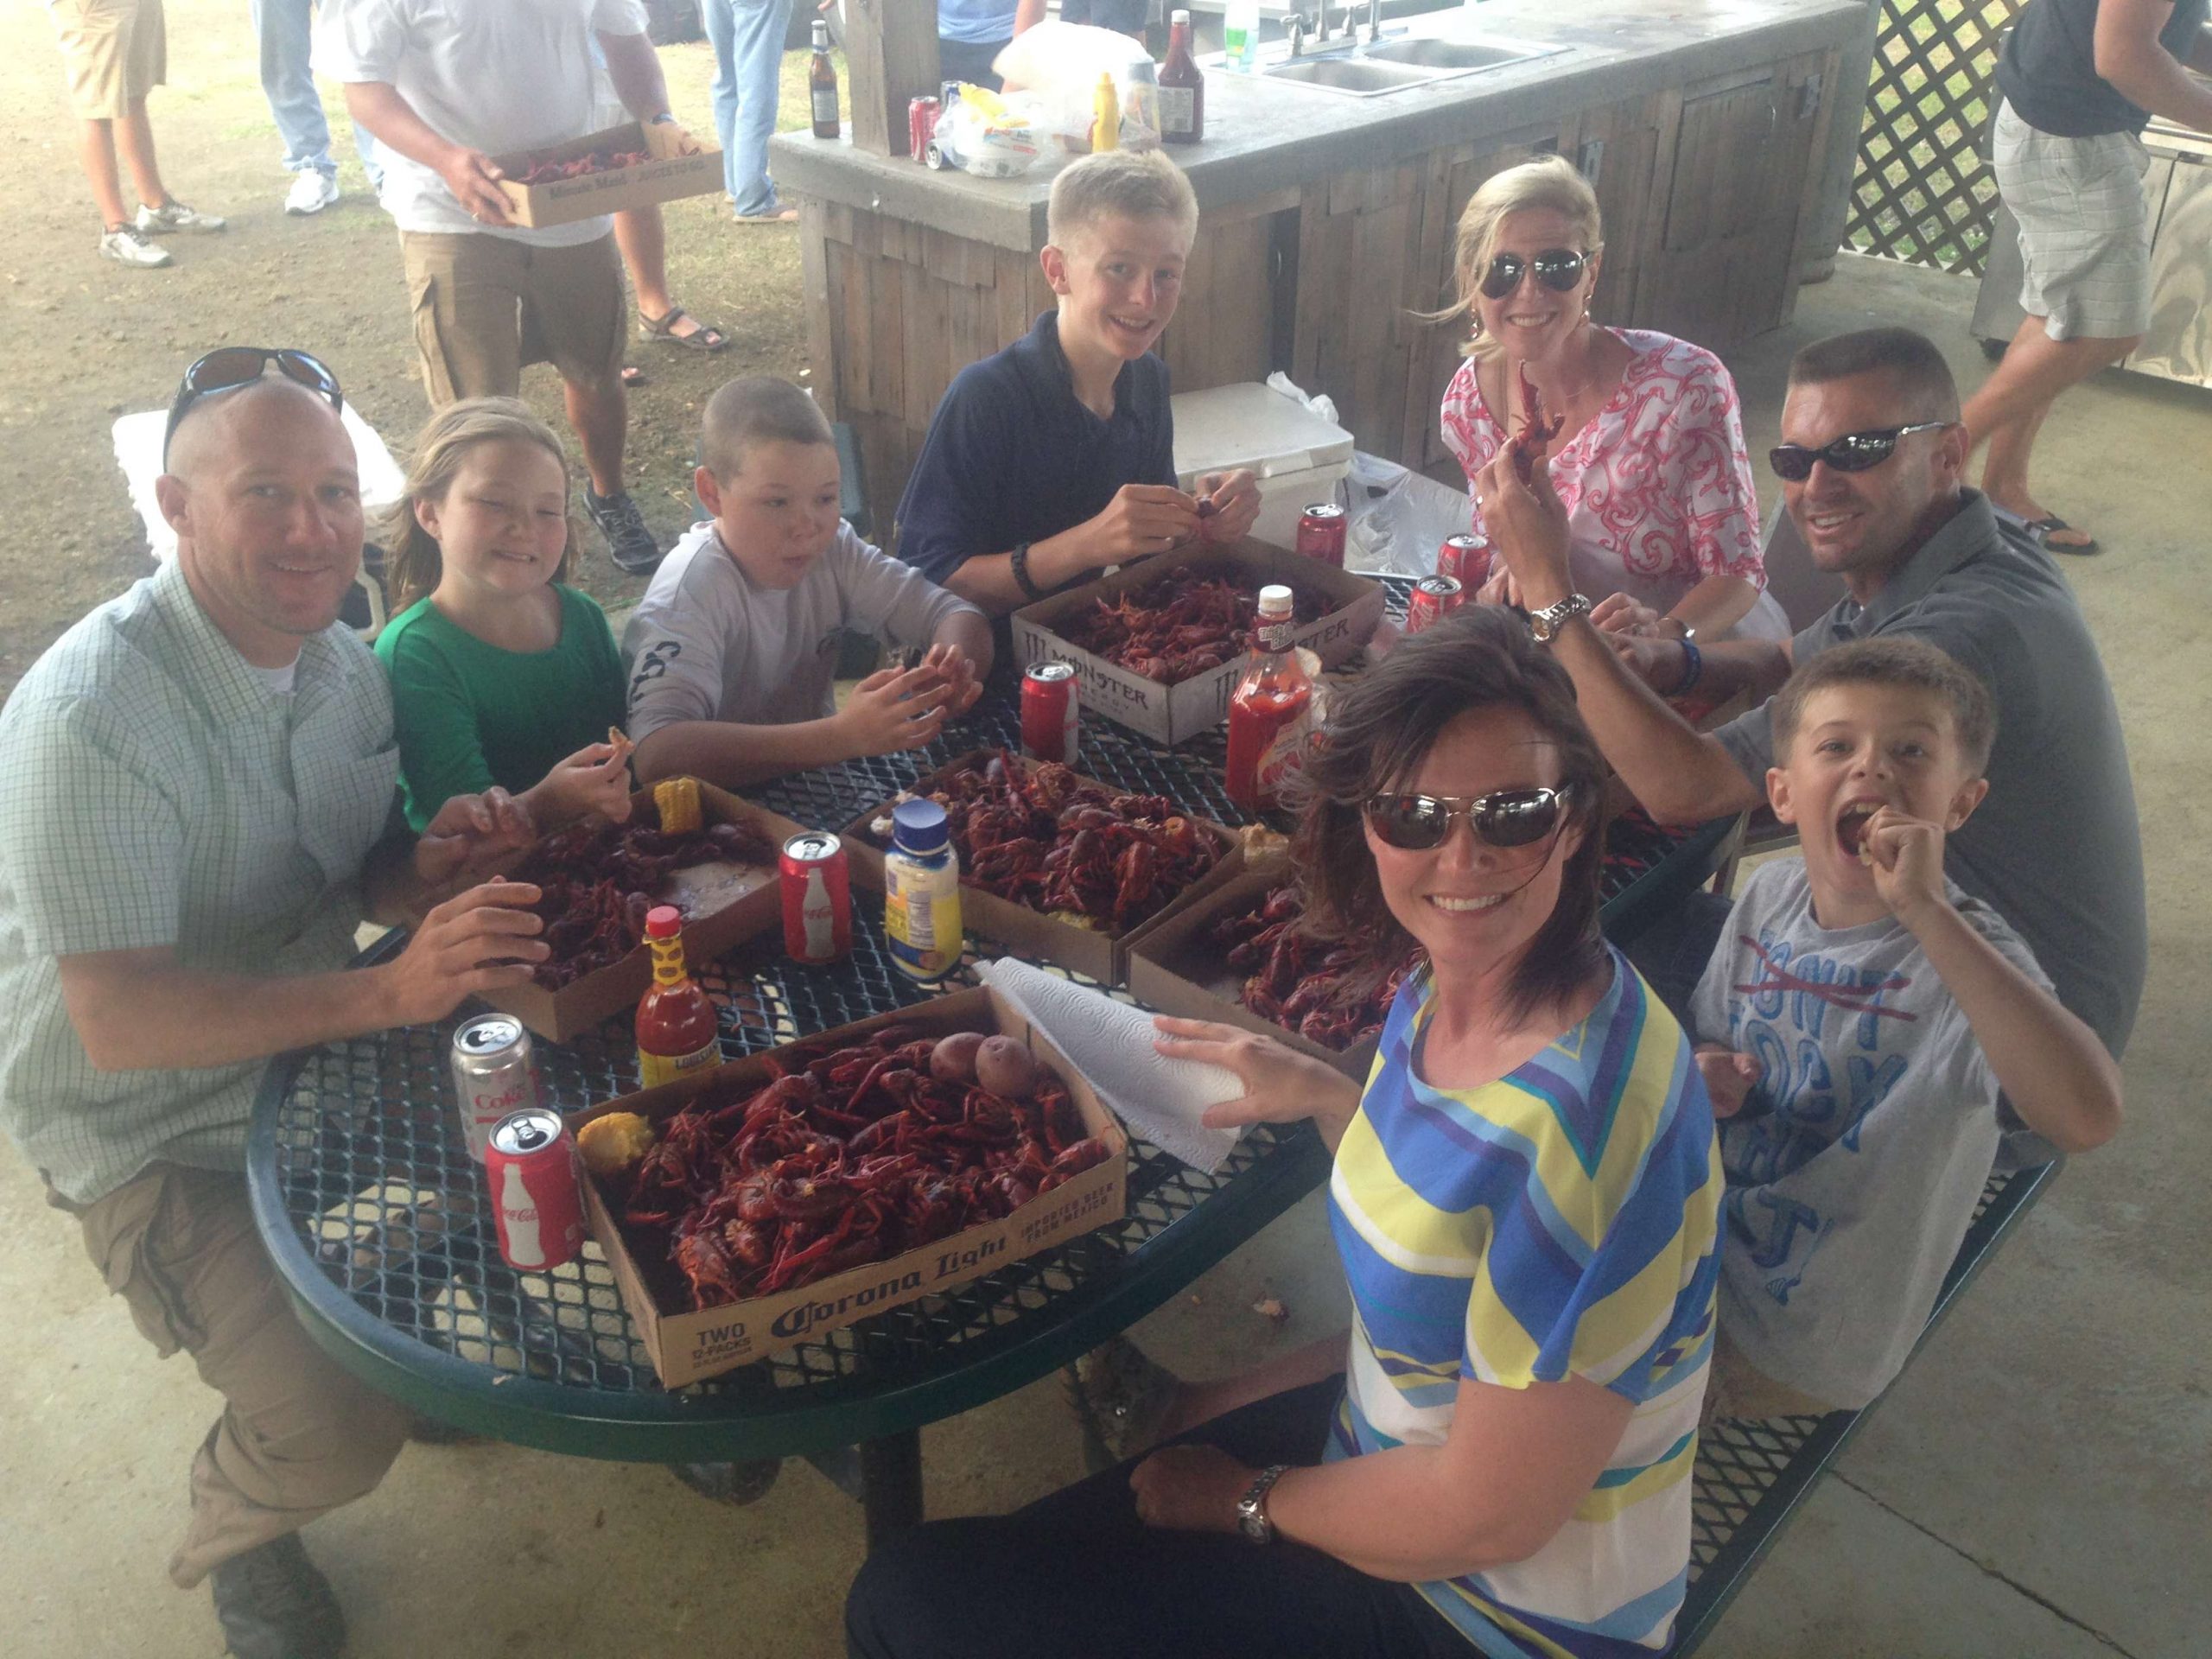 The Howells share a crawfish meal with their good friends the Chapmans.